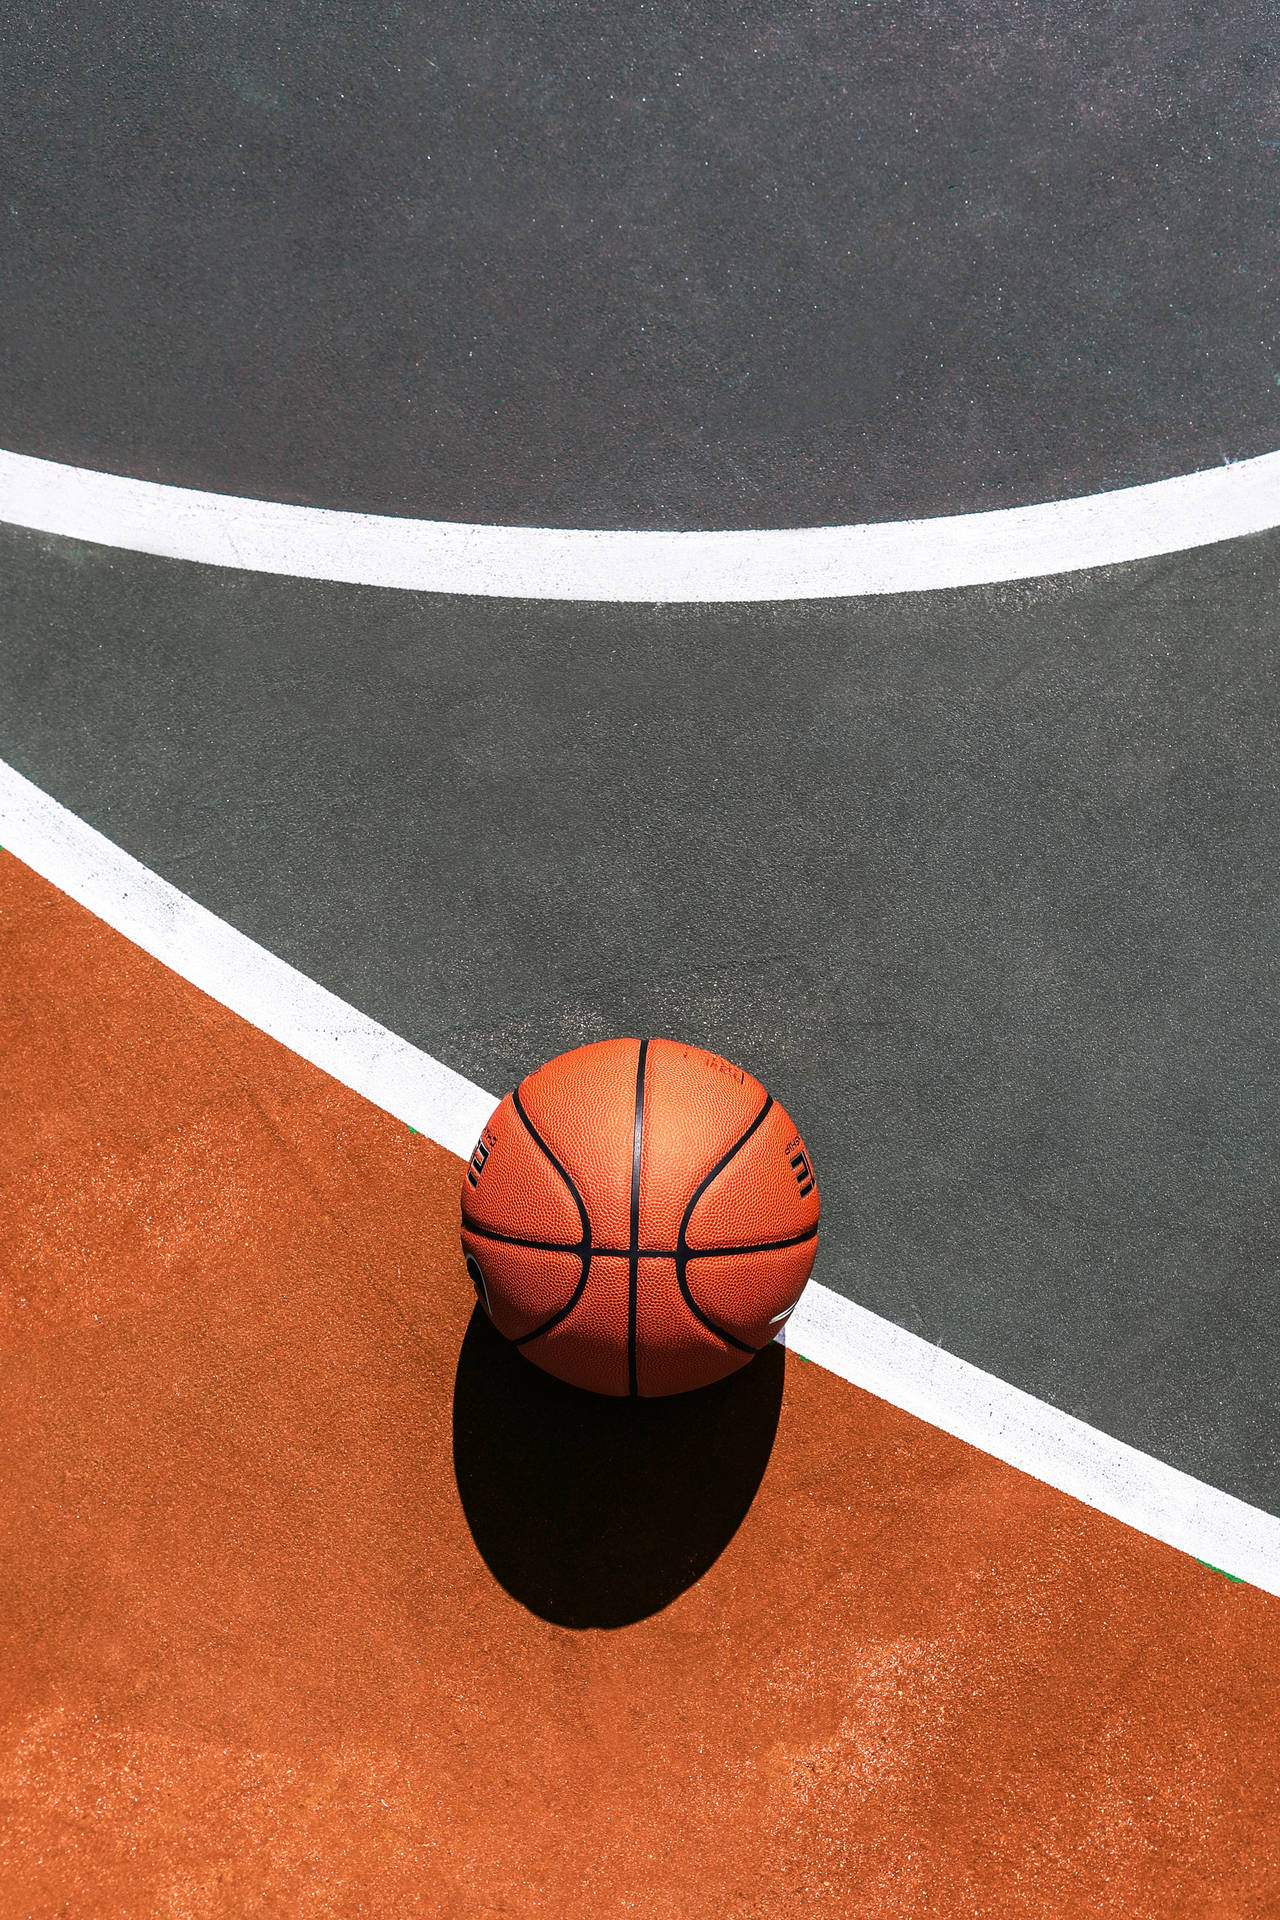 Basketball 3130X4695 Wallpaper and Background Image